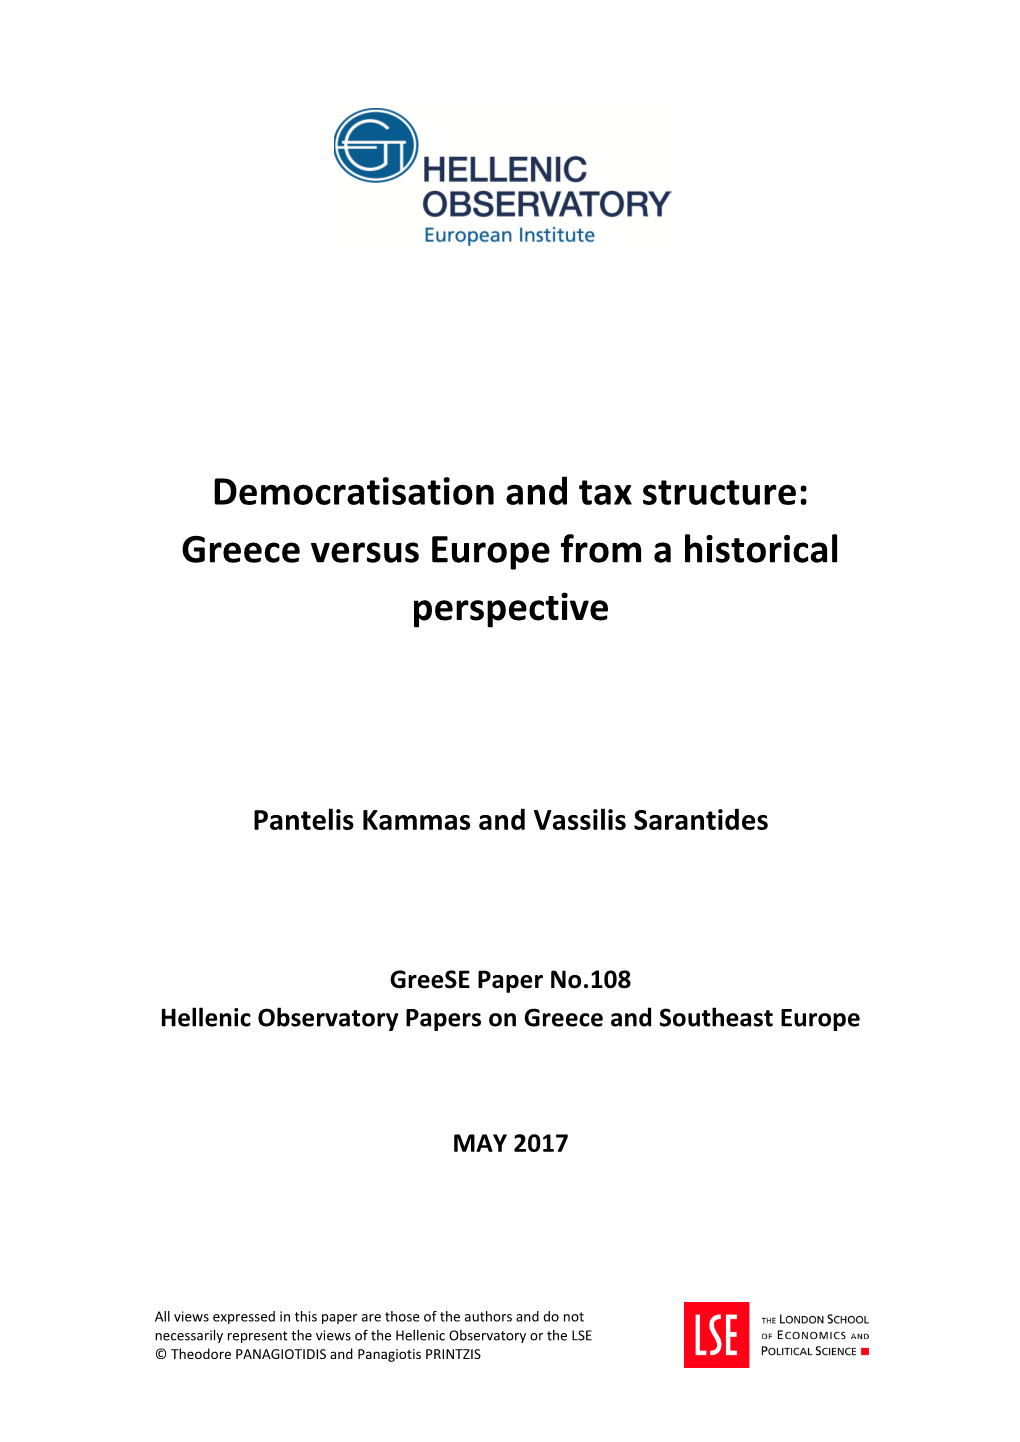 Democratisation and Tax Structure: Greece Versus Europe from a Historical Perspective